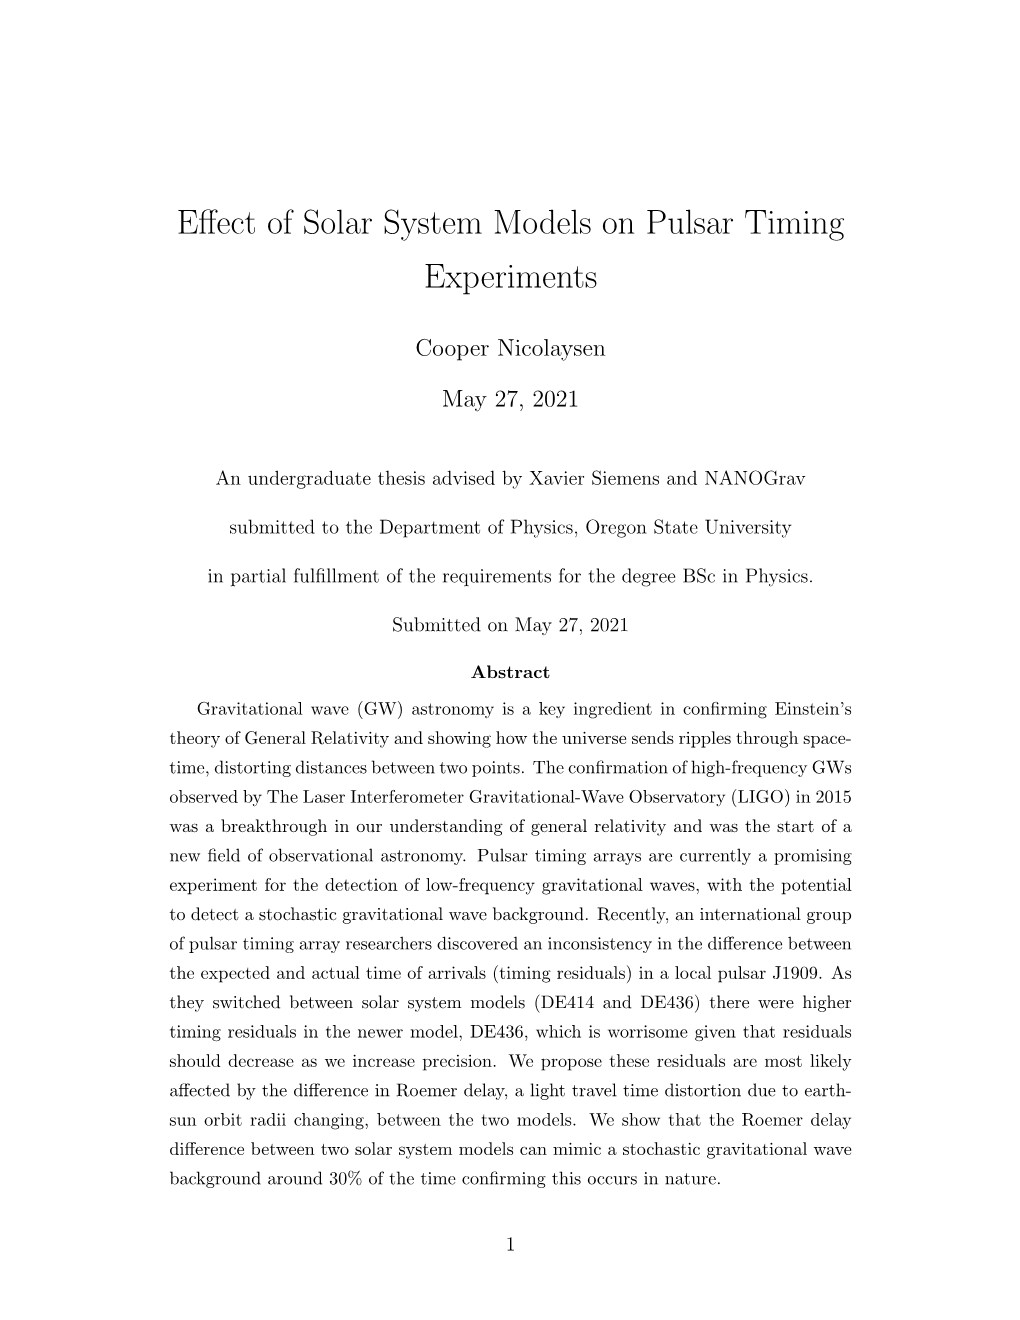 Effect of Solar System Models on Pulsar Timing Experiments